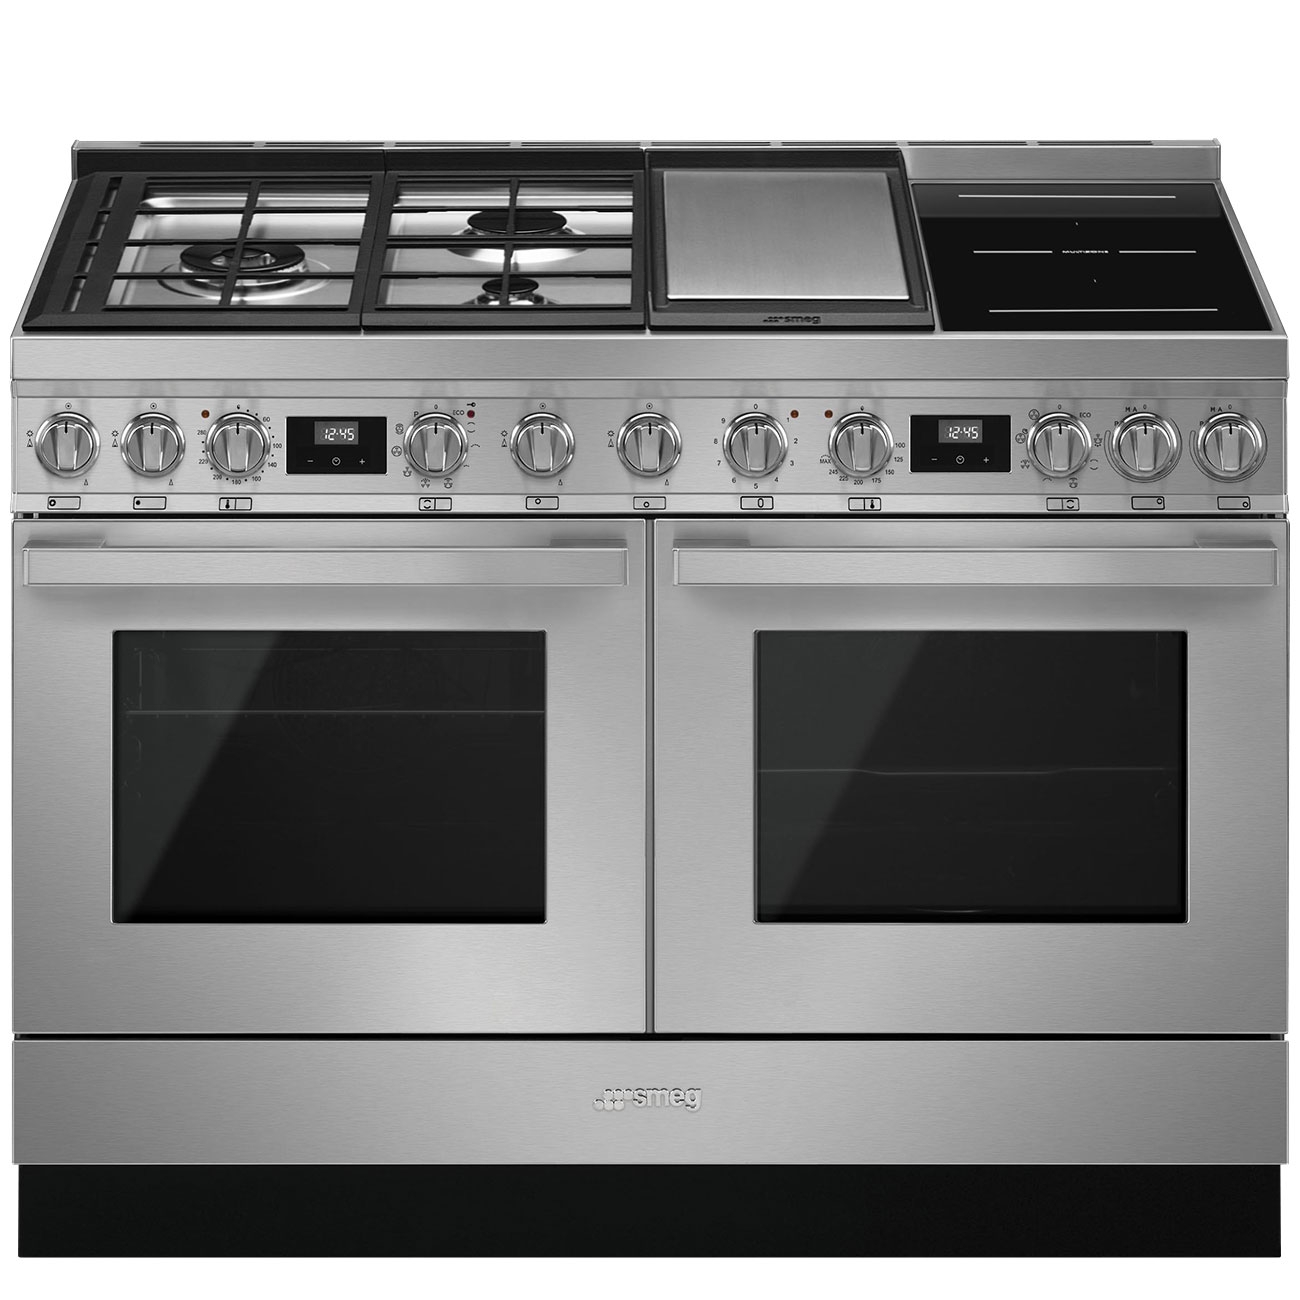 Smeg CPF120IGMPX Portofino 120cm Dual Cavity Cooker With Mixed Fuel Hob-Stainless Steel